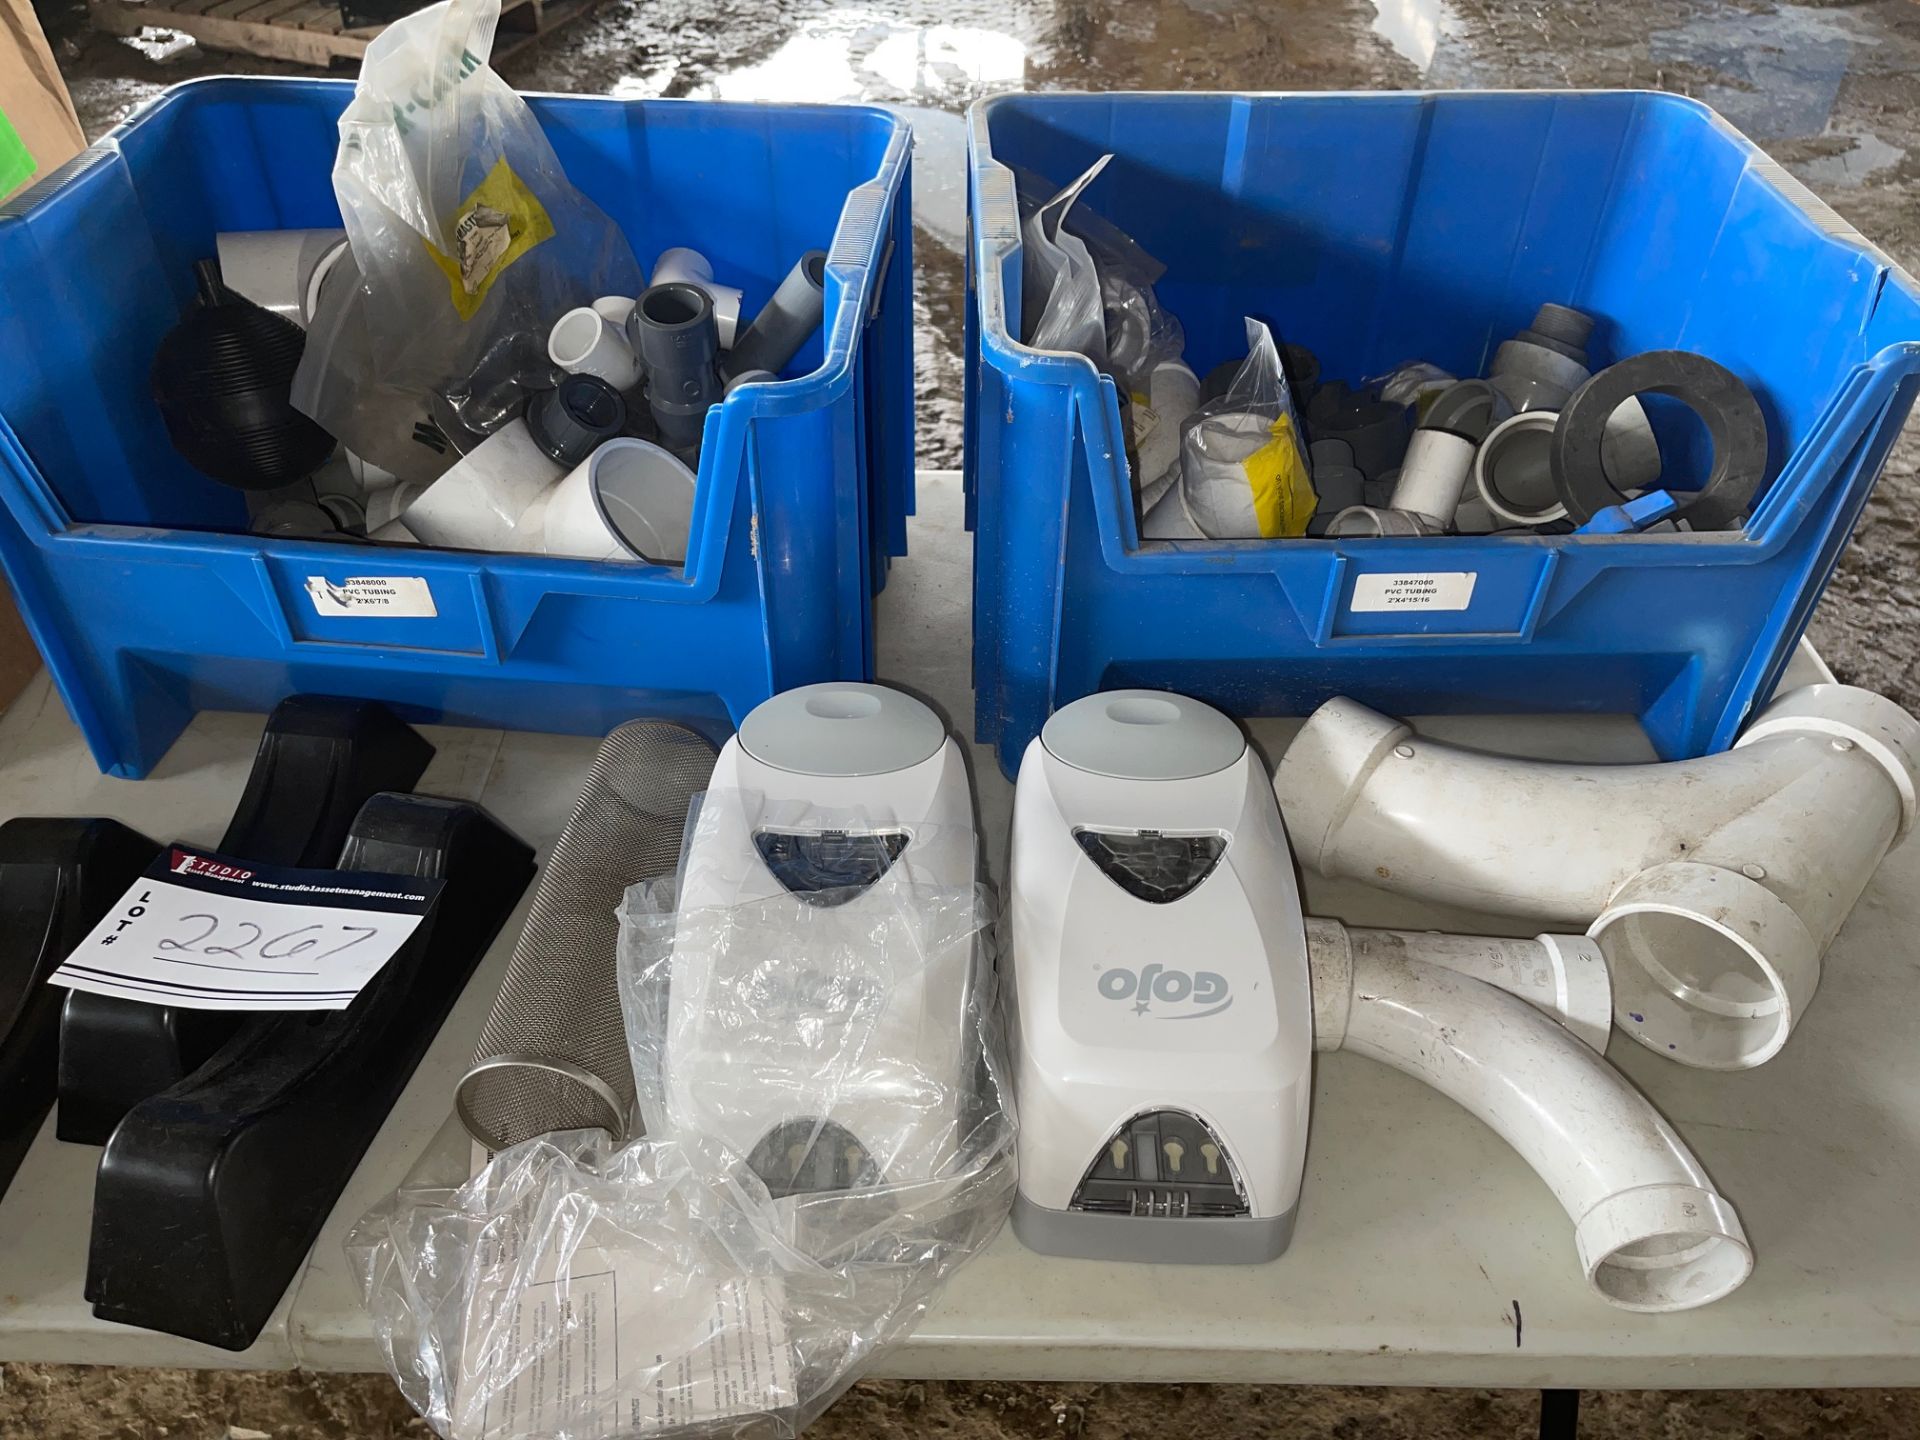 LOT OF MISCELLANEOUS PVC, ABS, FITTINGS, FLOATS, APPROX 20, KOJO SOAP AND DISINFECTANT DISPENSER,